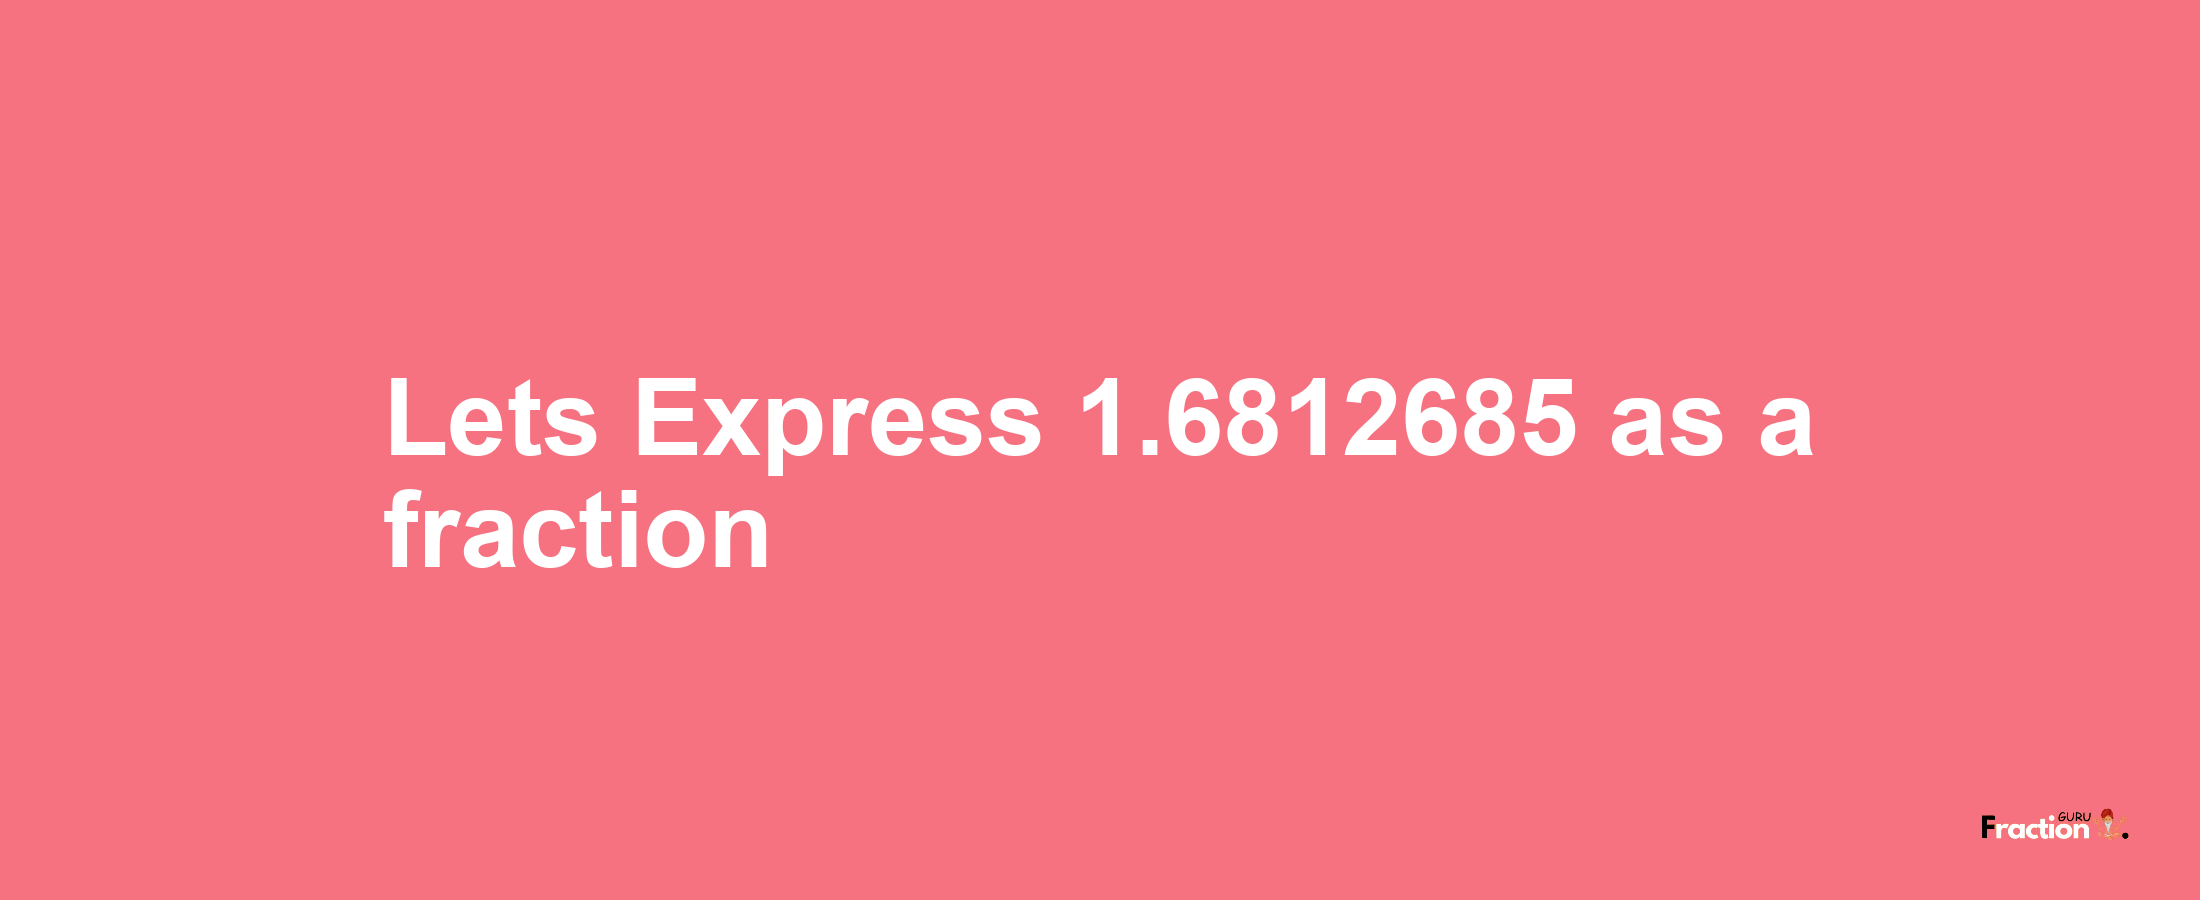 Lets Express 1.6812685 as afraction